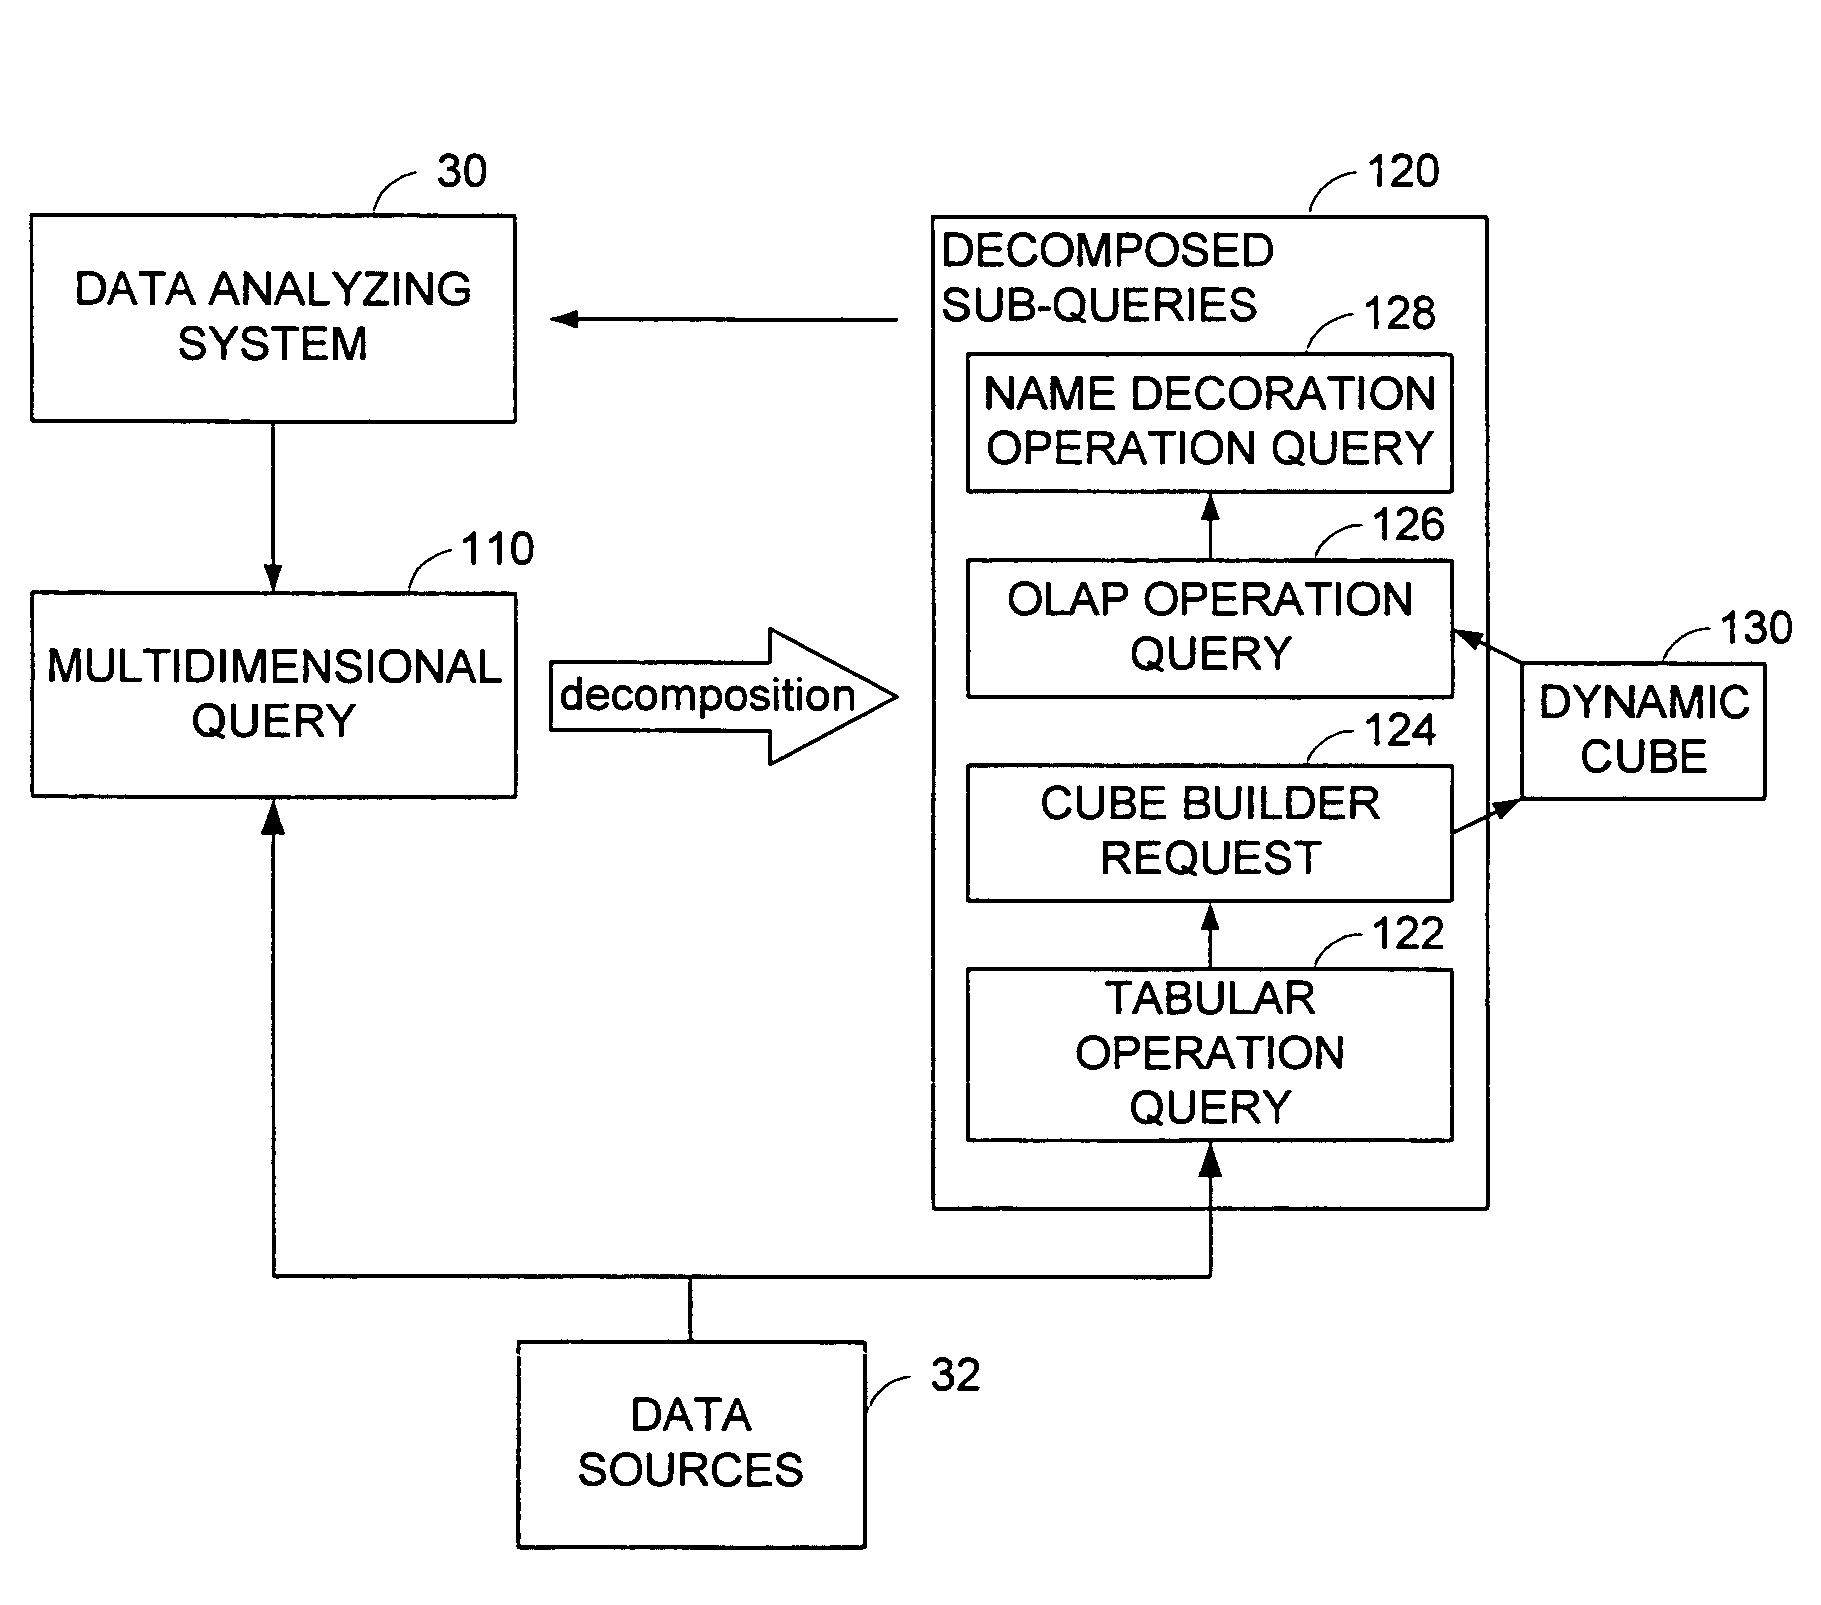 Method of processing and decomposing a multidimensional query against a relational data source